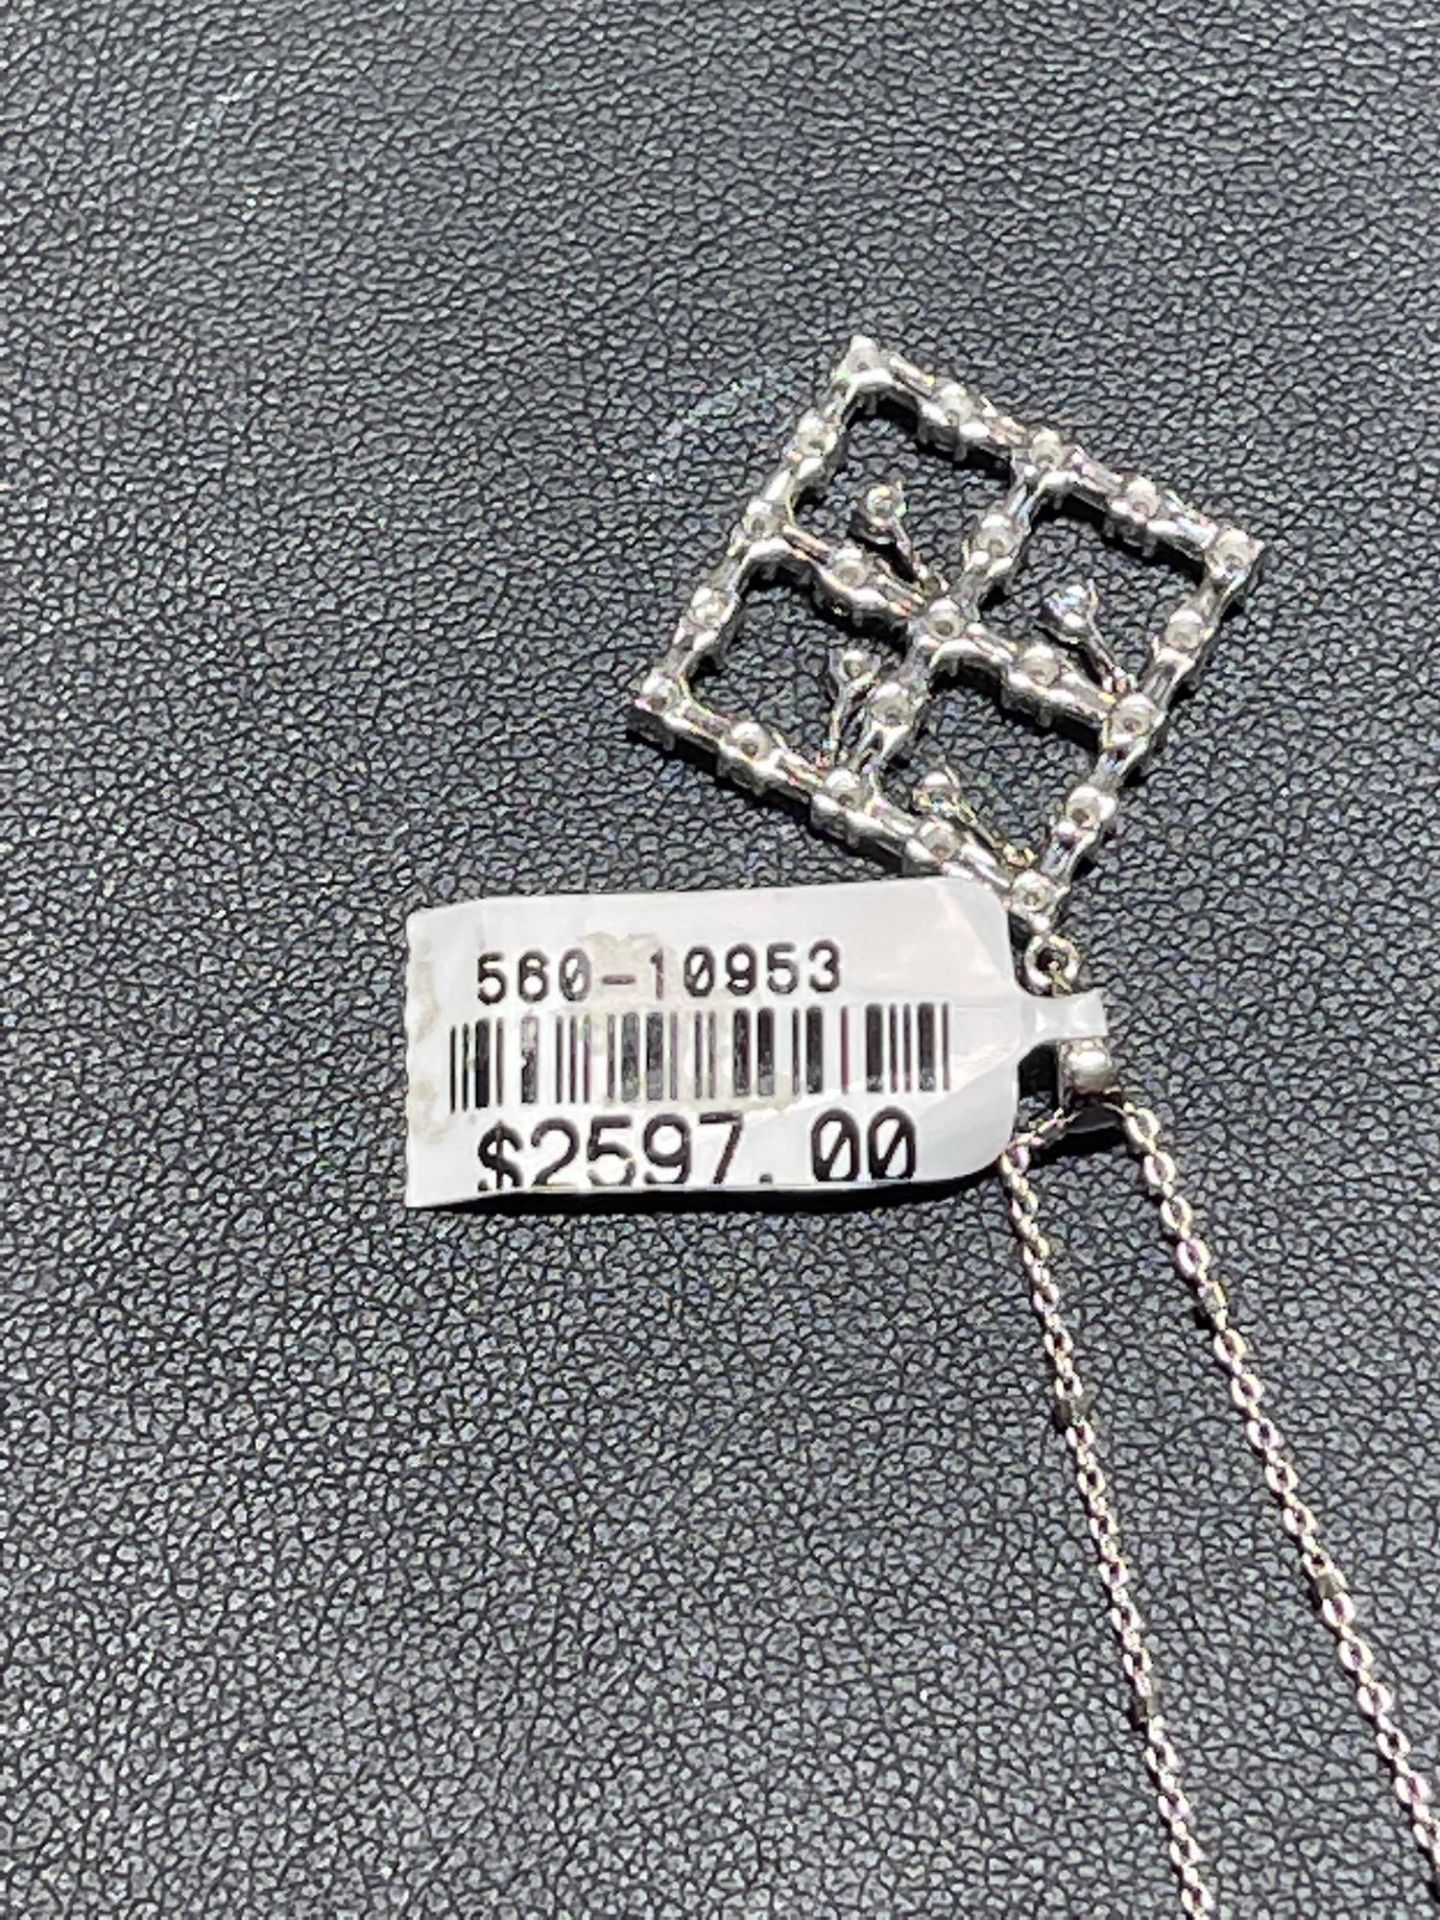 18KT WHITE GOLD .51CT DIAMOND NECKLACE - Image 3 of 3